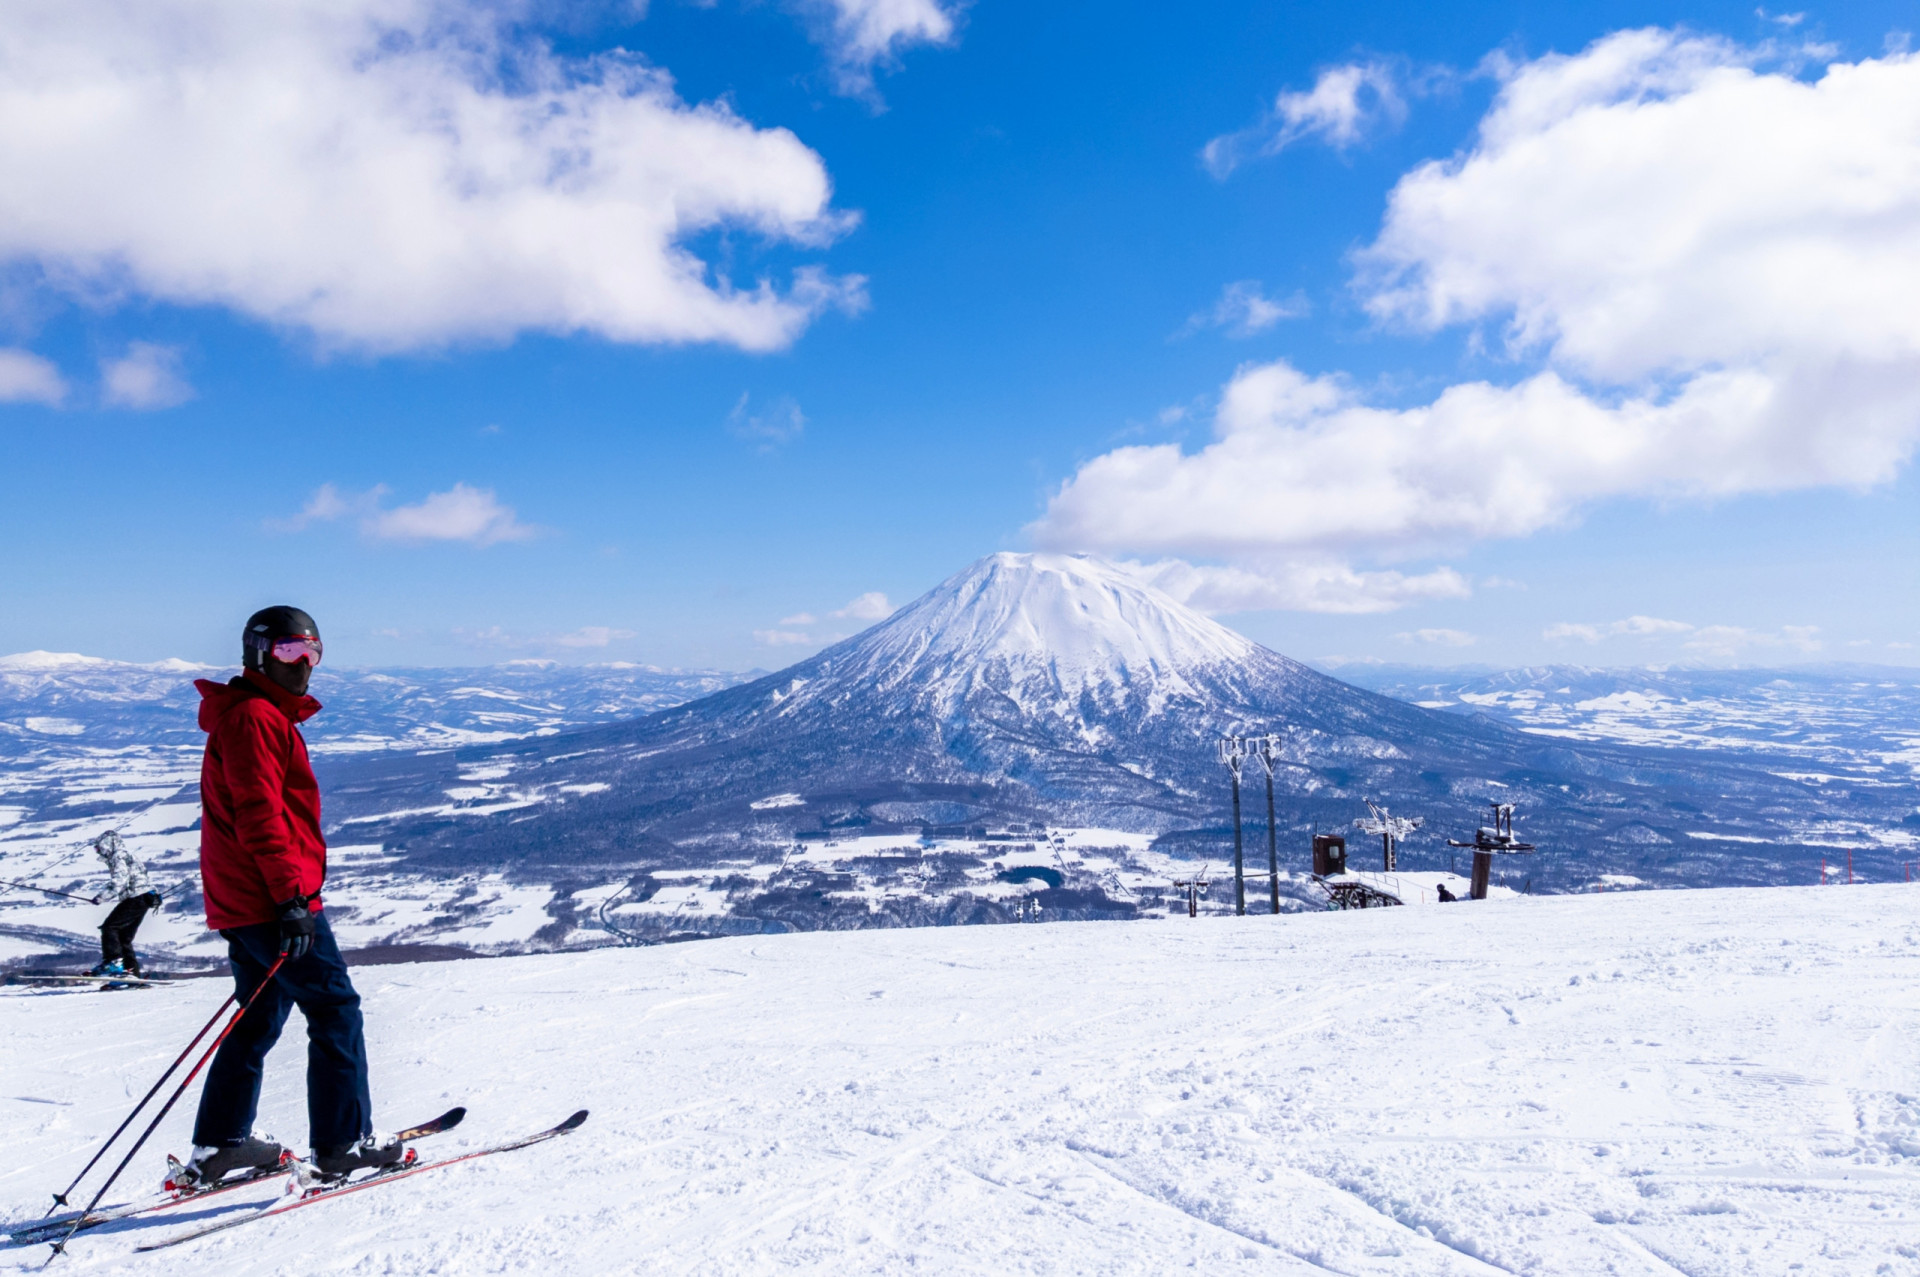 <p>On the other side of the world, Japan is well placed on the winter sports calendar. Those in the know head for Hokkaido, the northernmost of Japan's main islands. Blessed with exceptional snowfall, this is one of the world's premier ski destinations.</p>